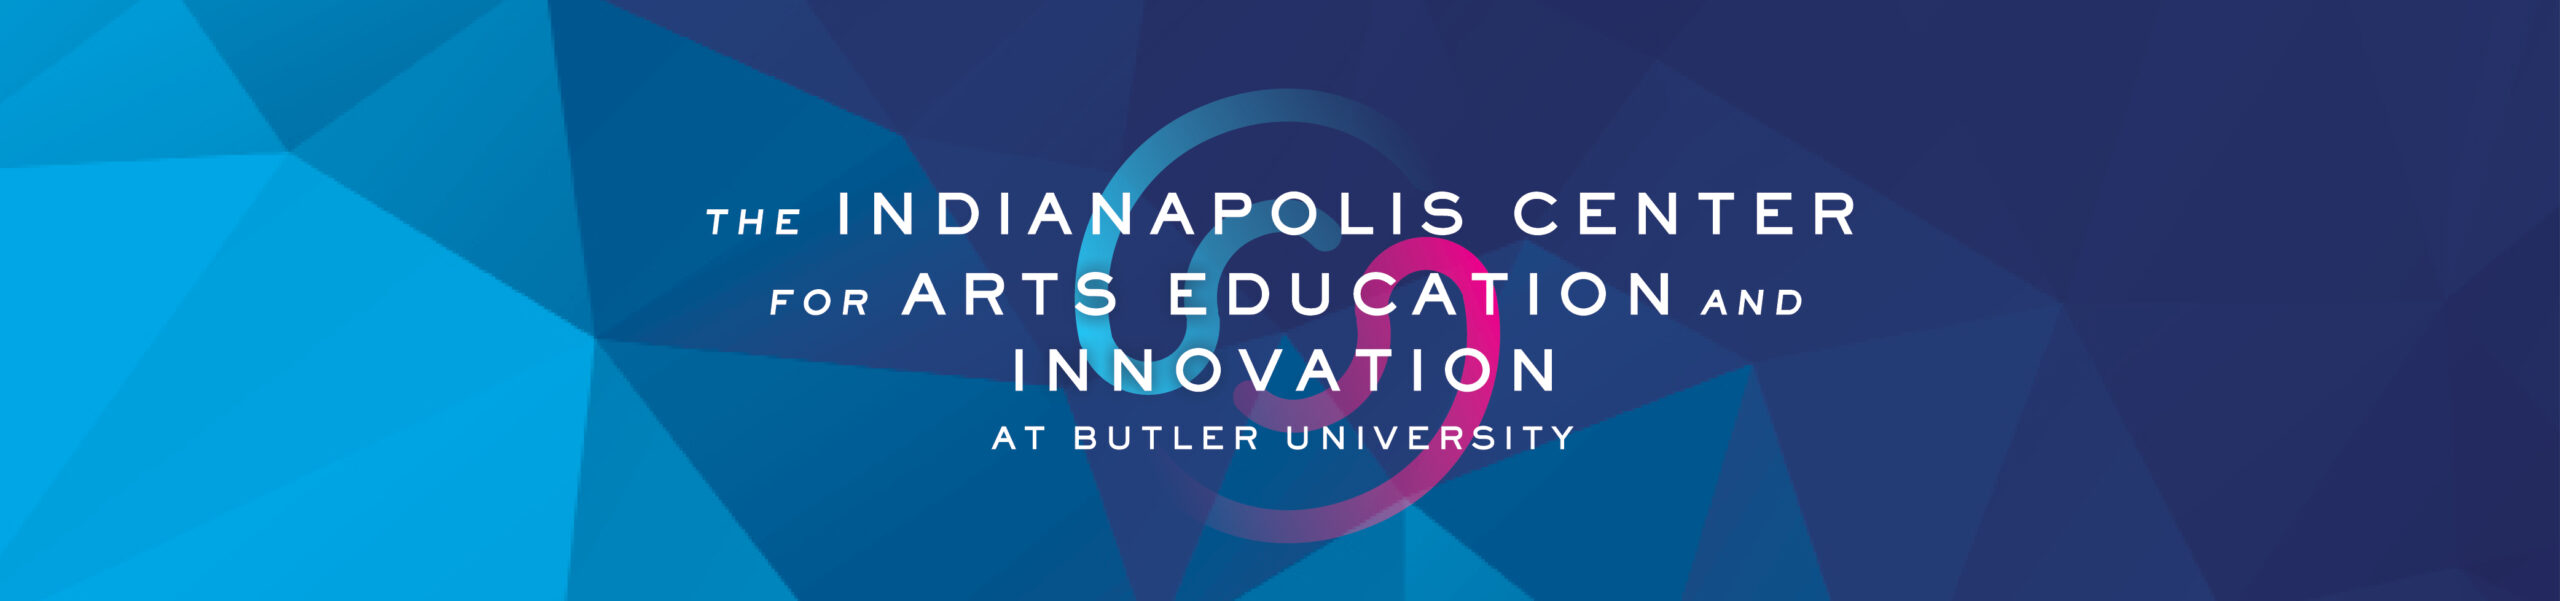 the Indianapolis Center for Arts Education and Innovation at Butler University